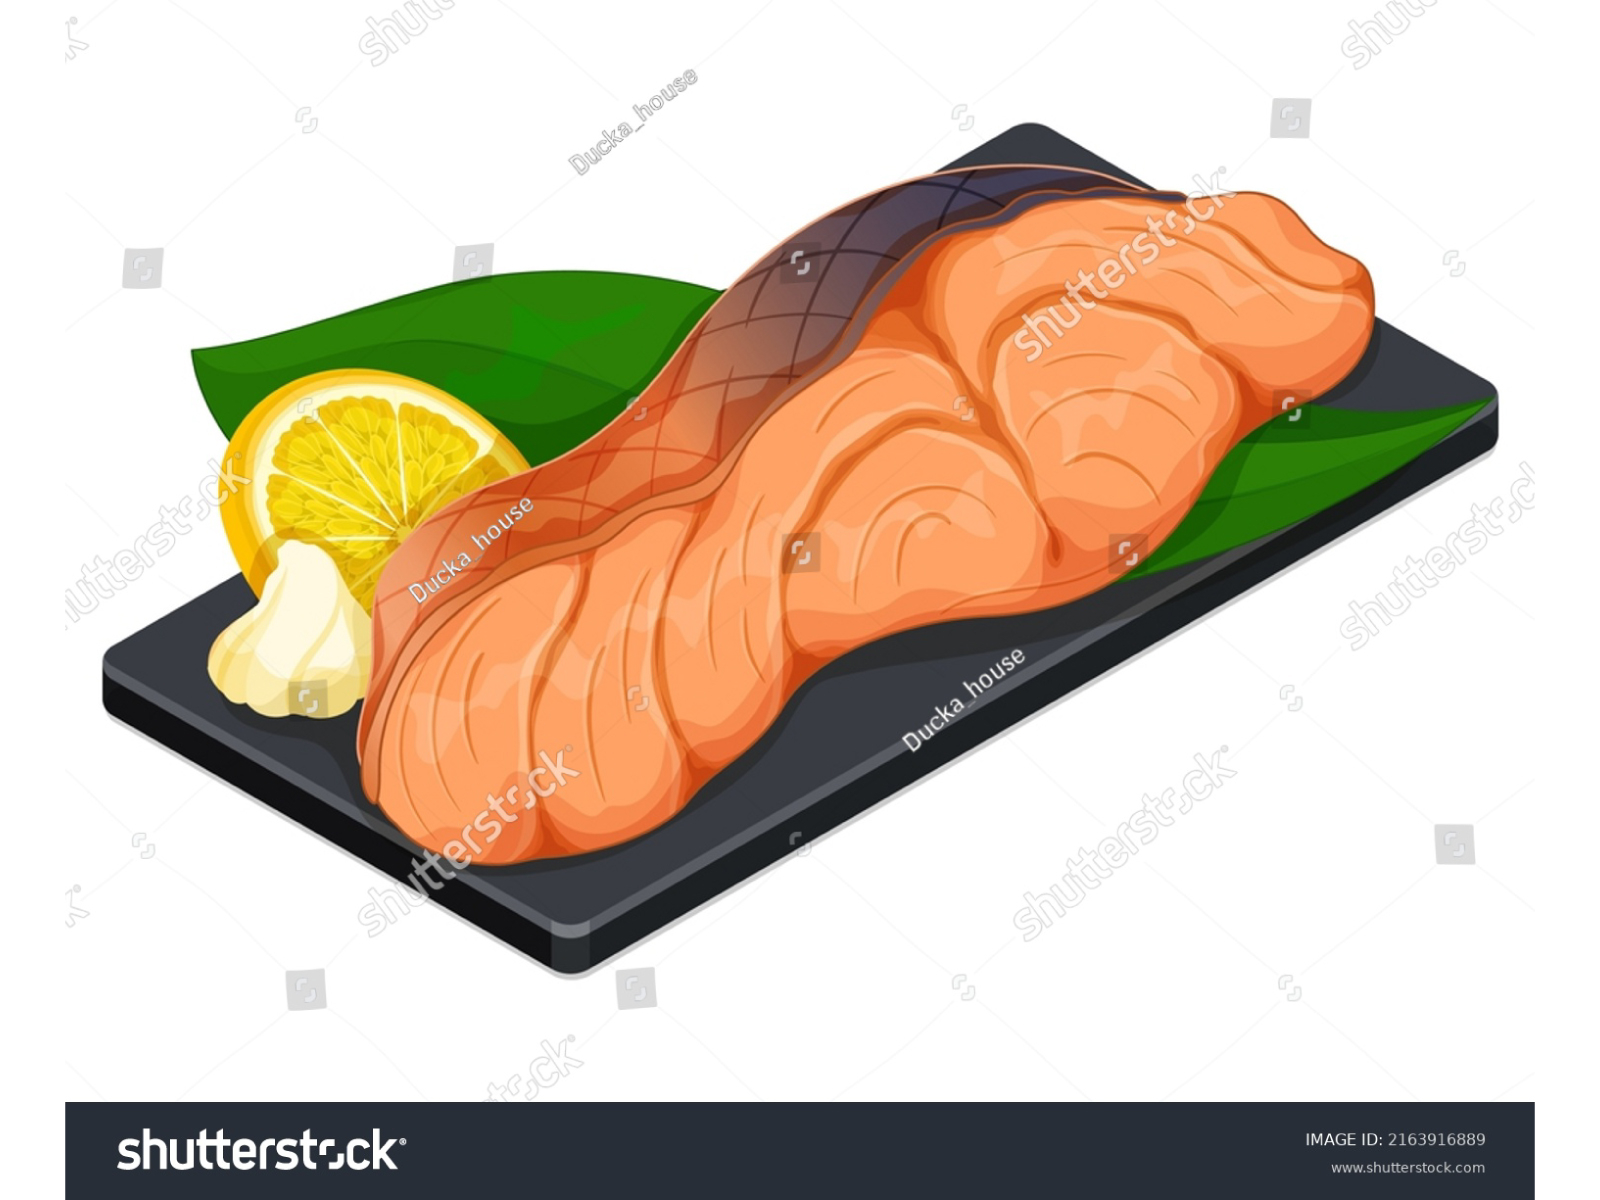 Japanese Sushi on a Wooden Board, Salmon Rolls with Rice Stock Image -  Image of artwork, elegant: 257824359